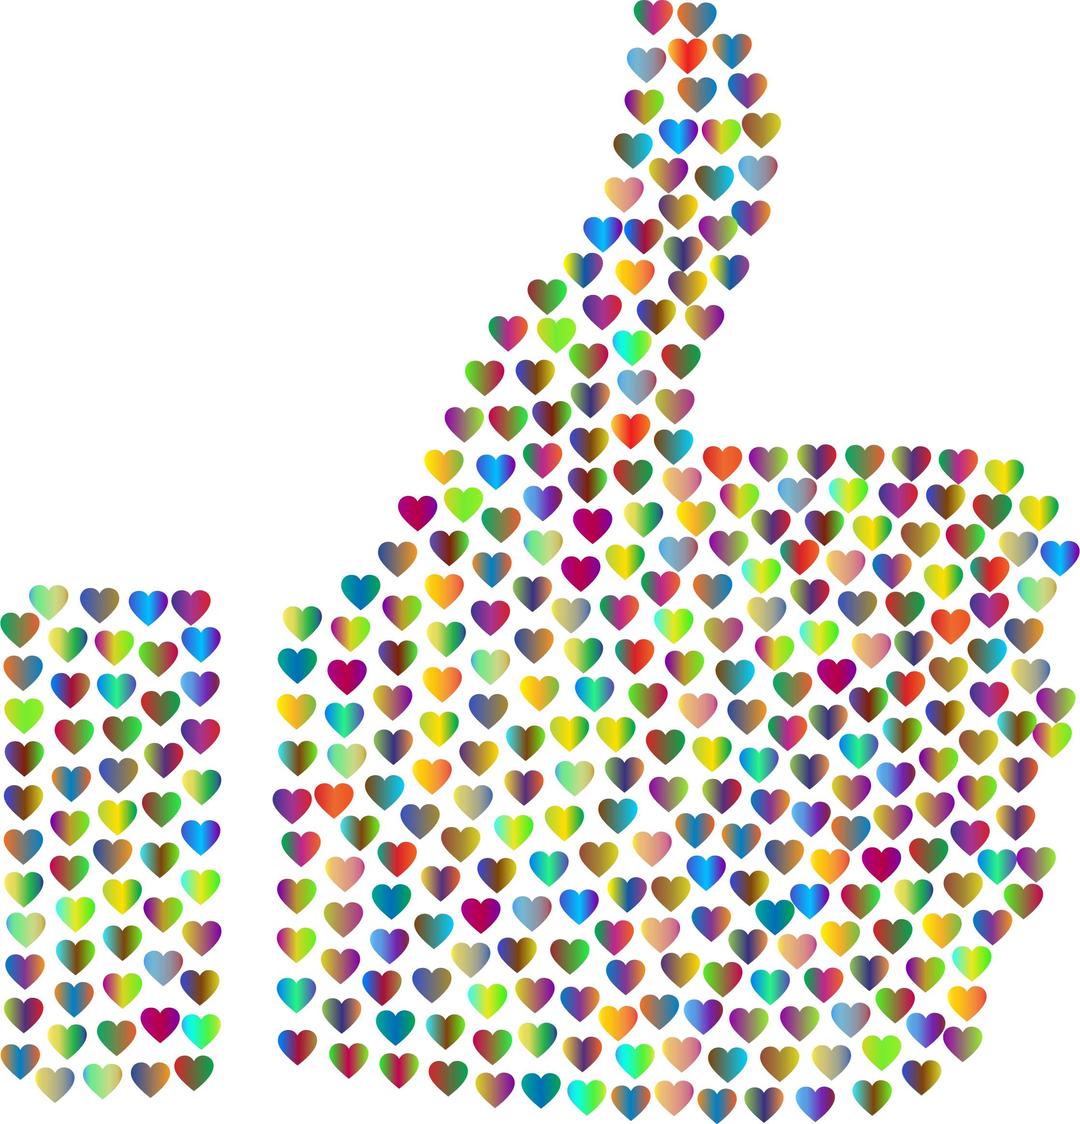 Prismatic Hearts Thumbs Up Silhouette 4 No Background png transparent